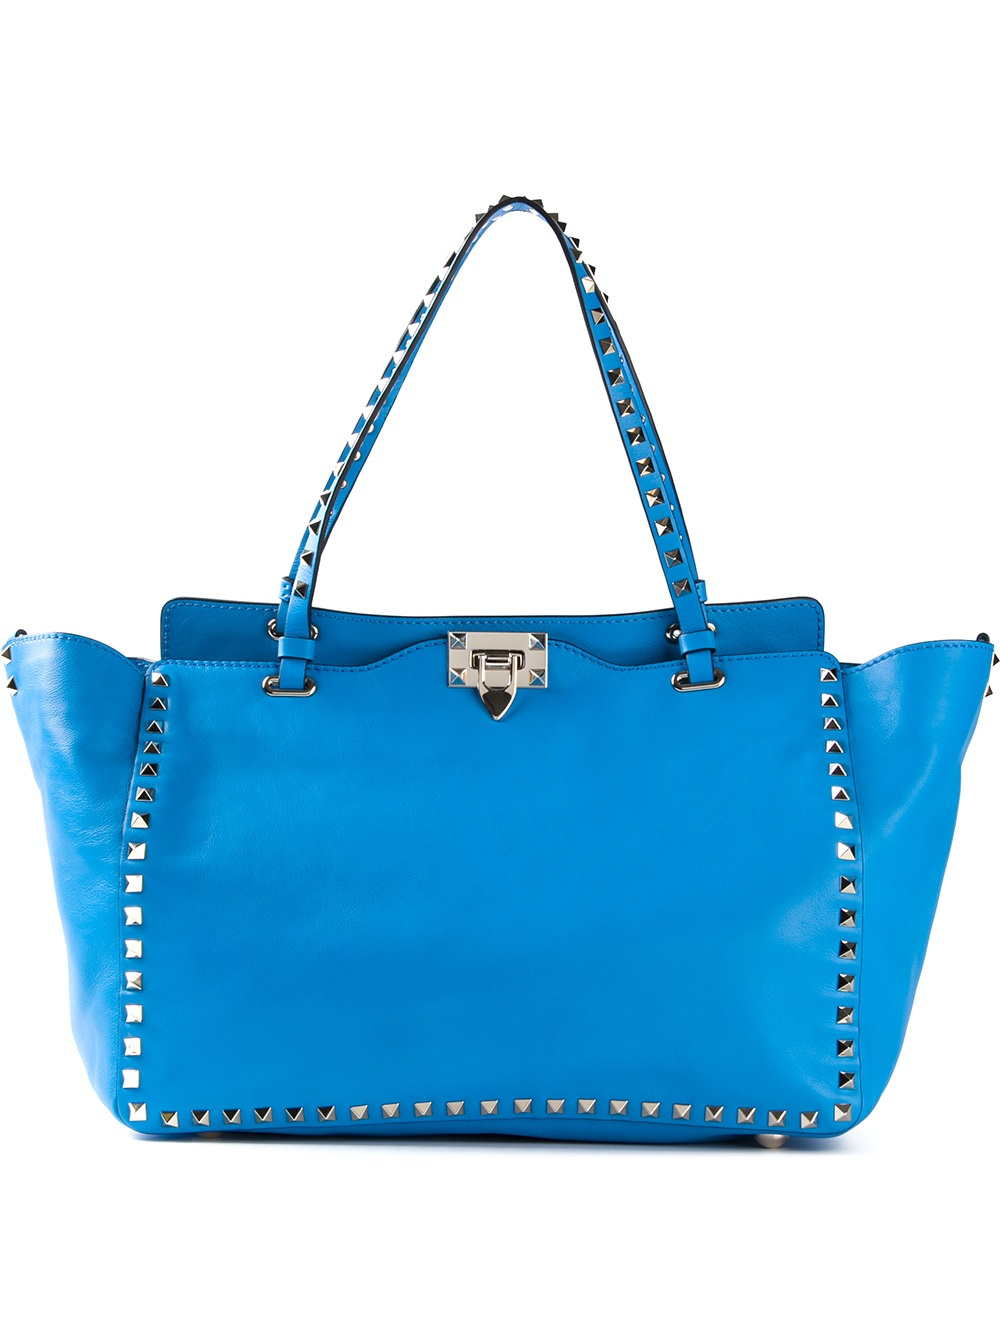 Lyst - Valentino Large 'Rockstud' Trapeze Tote in Blue